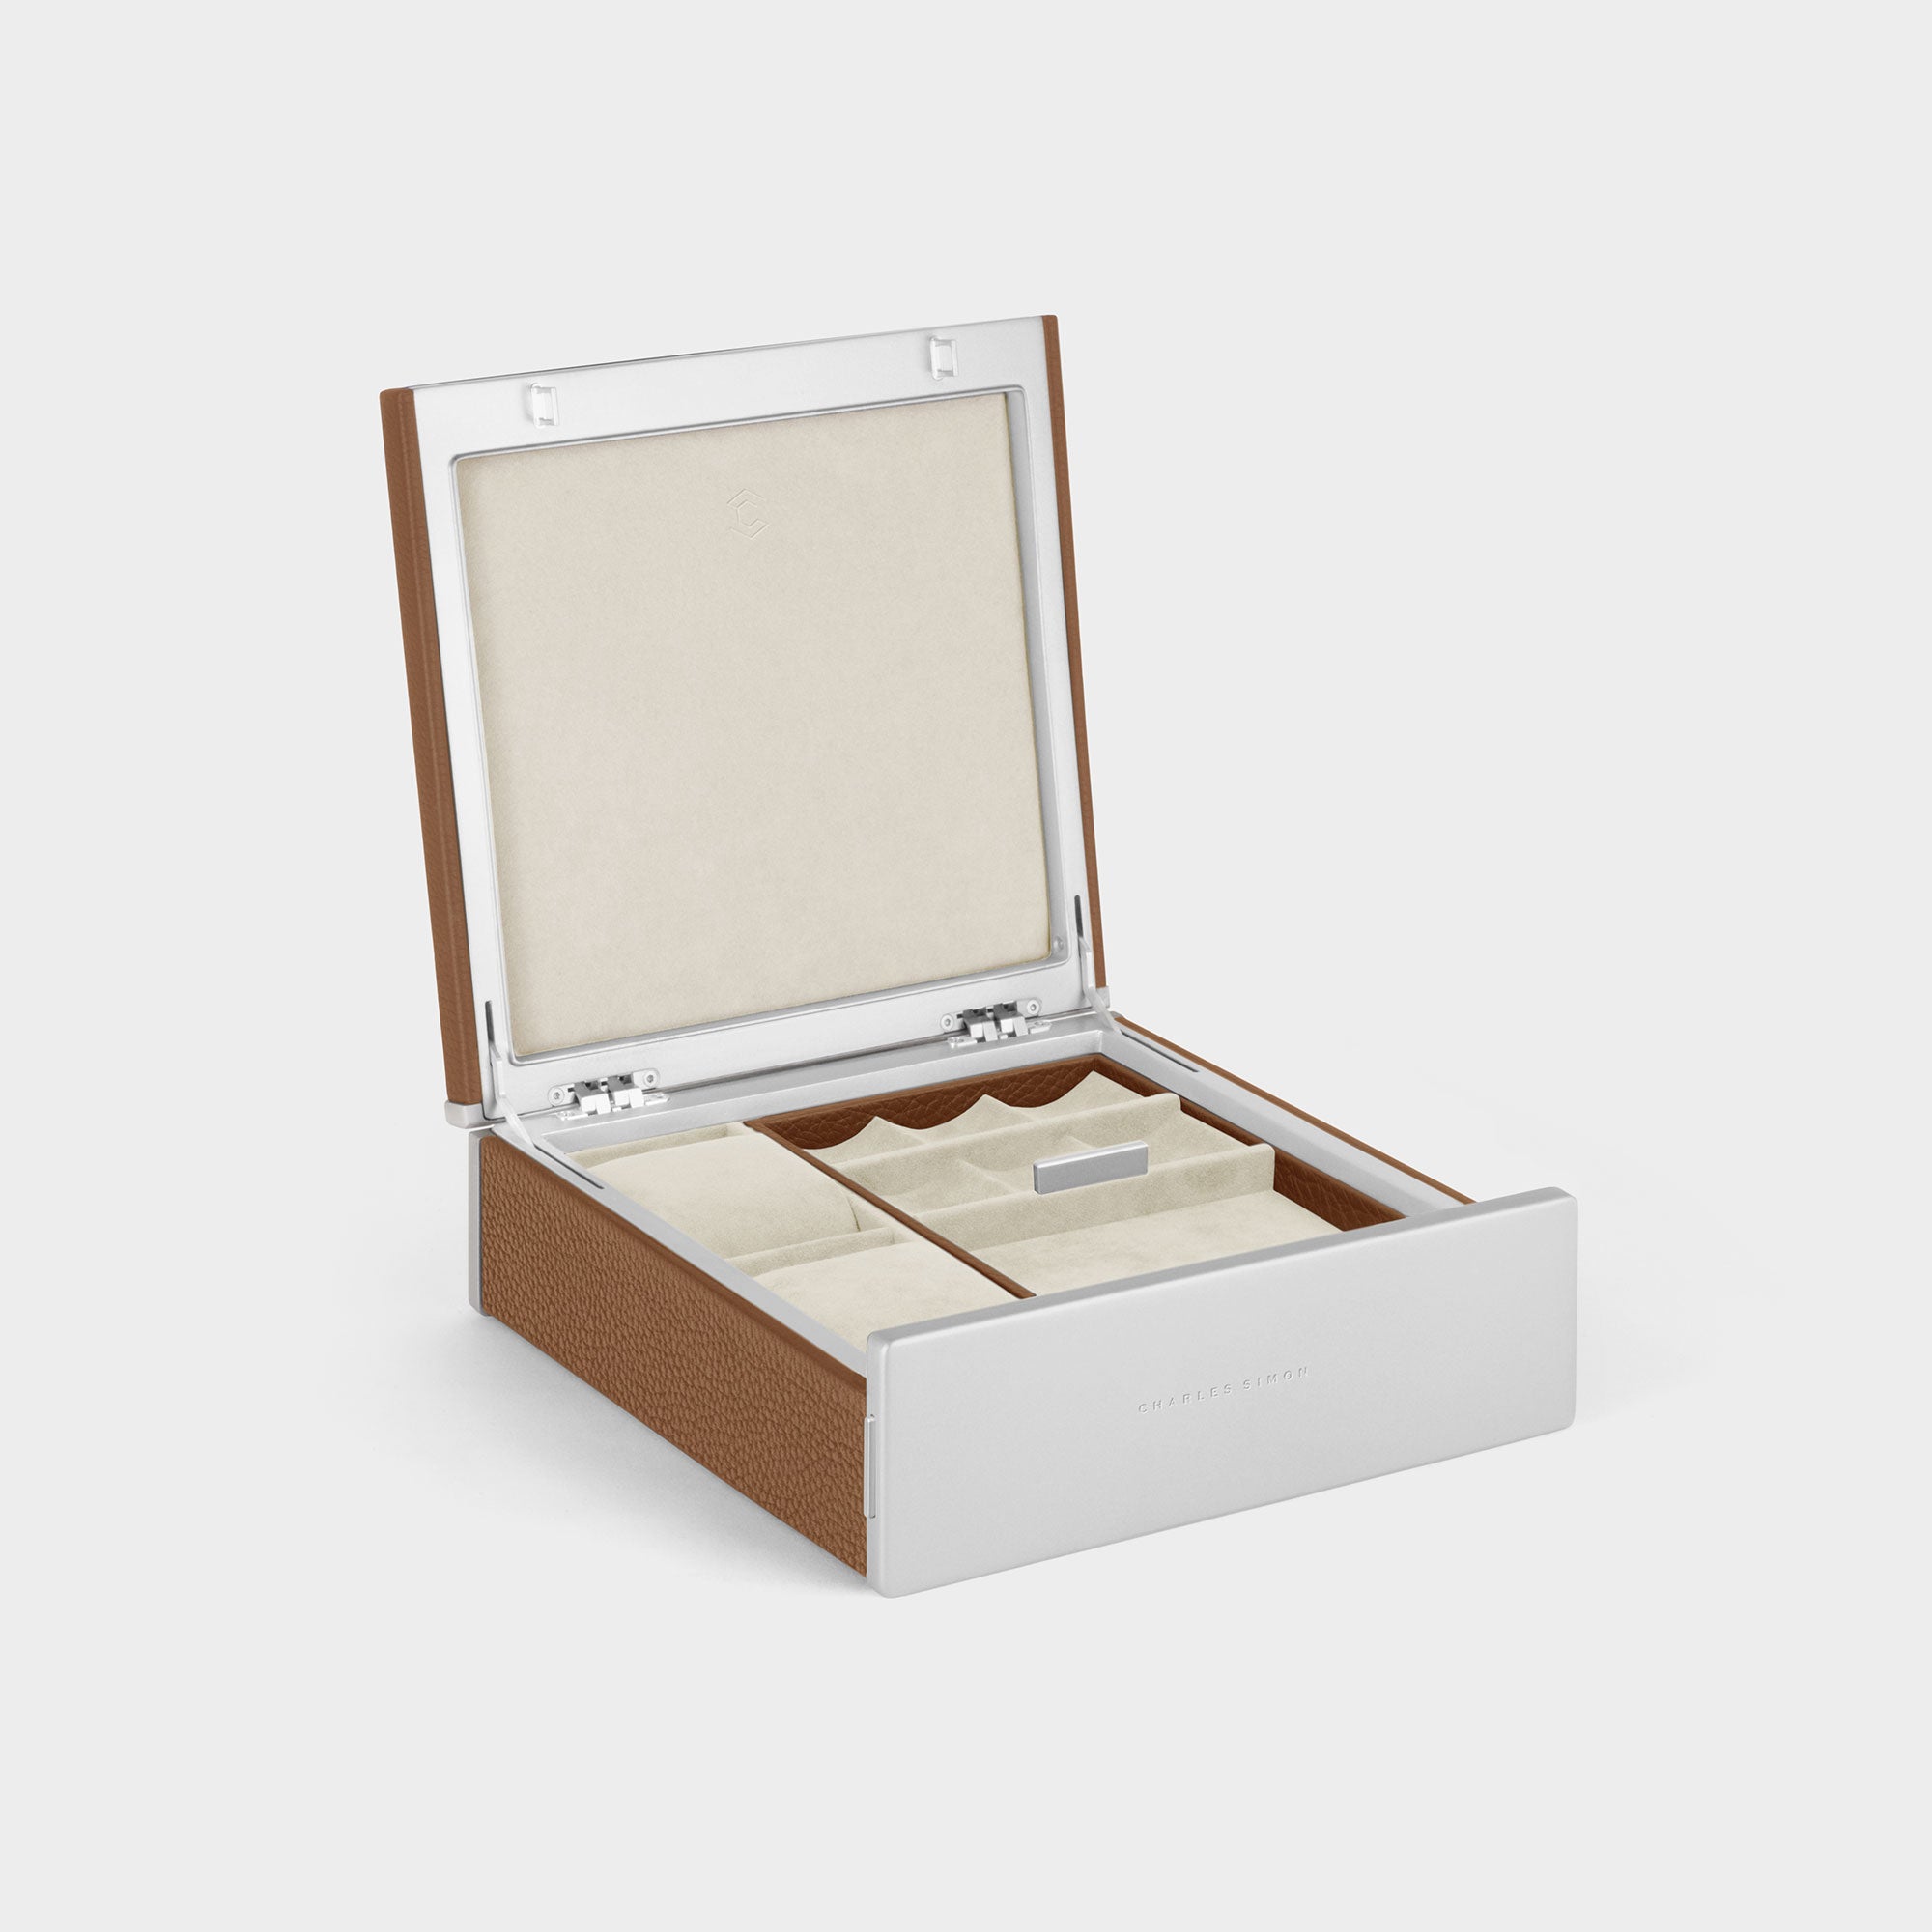 Product photo of open Taylor 2 Watch and Jewelry box in tan leather and eggshell interior showing jewelry storage compartments and two watch cushions